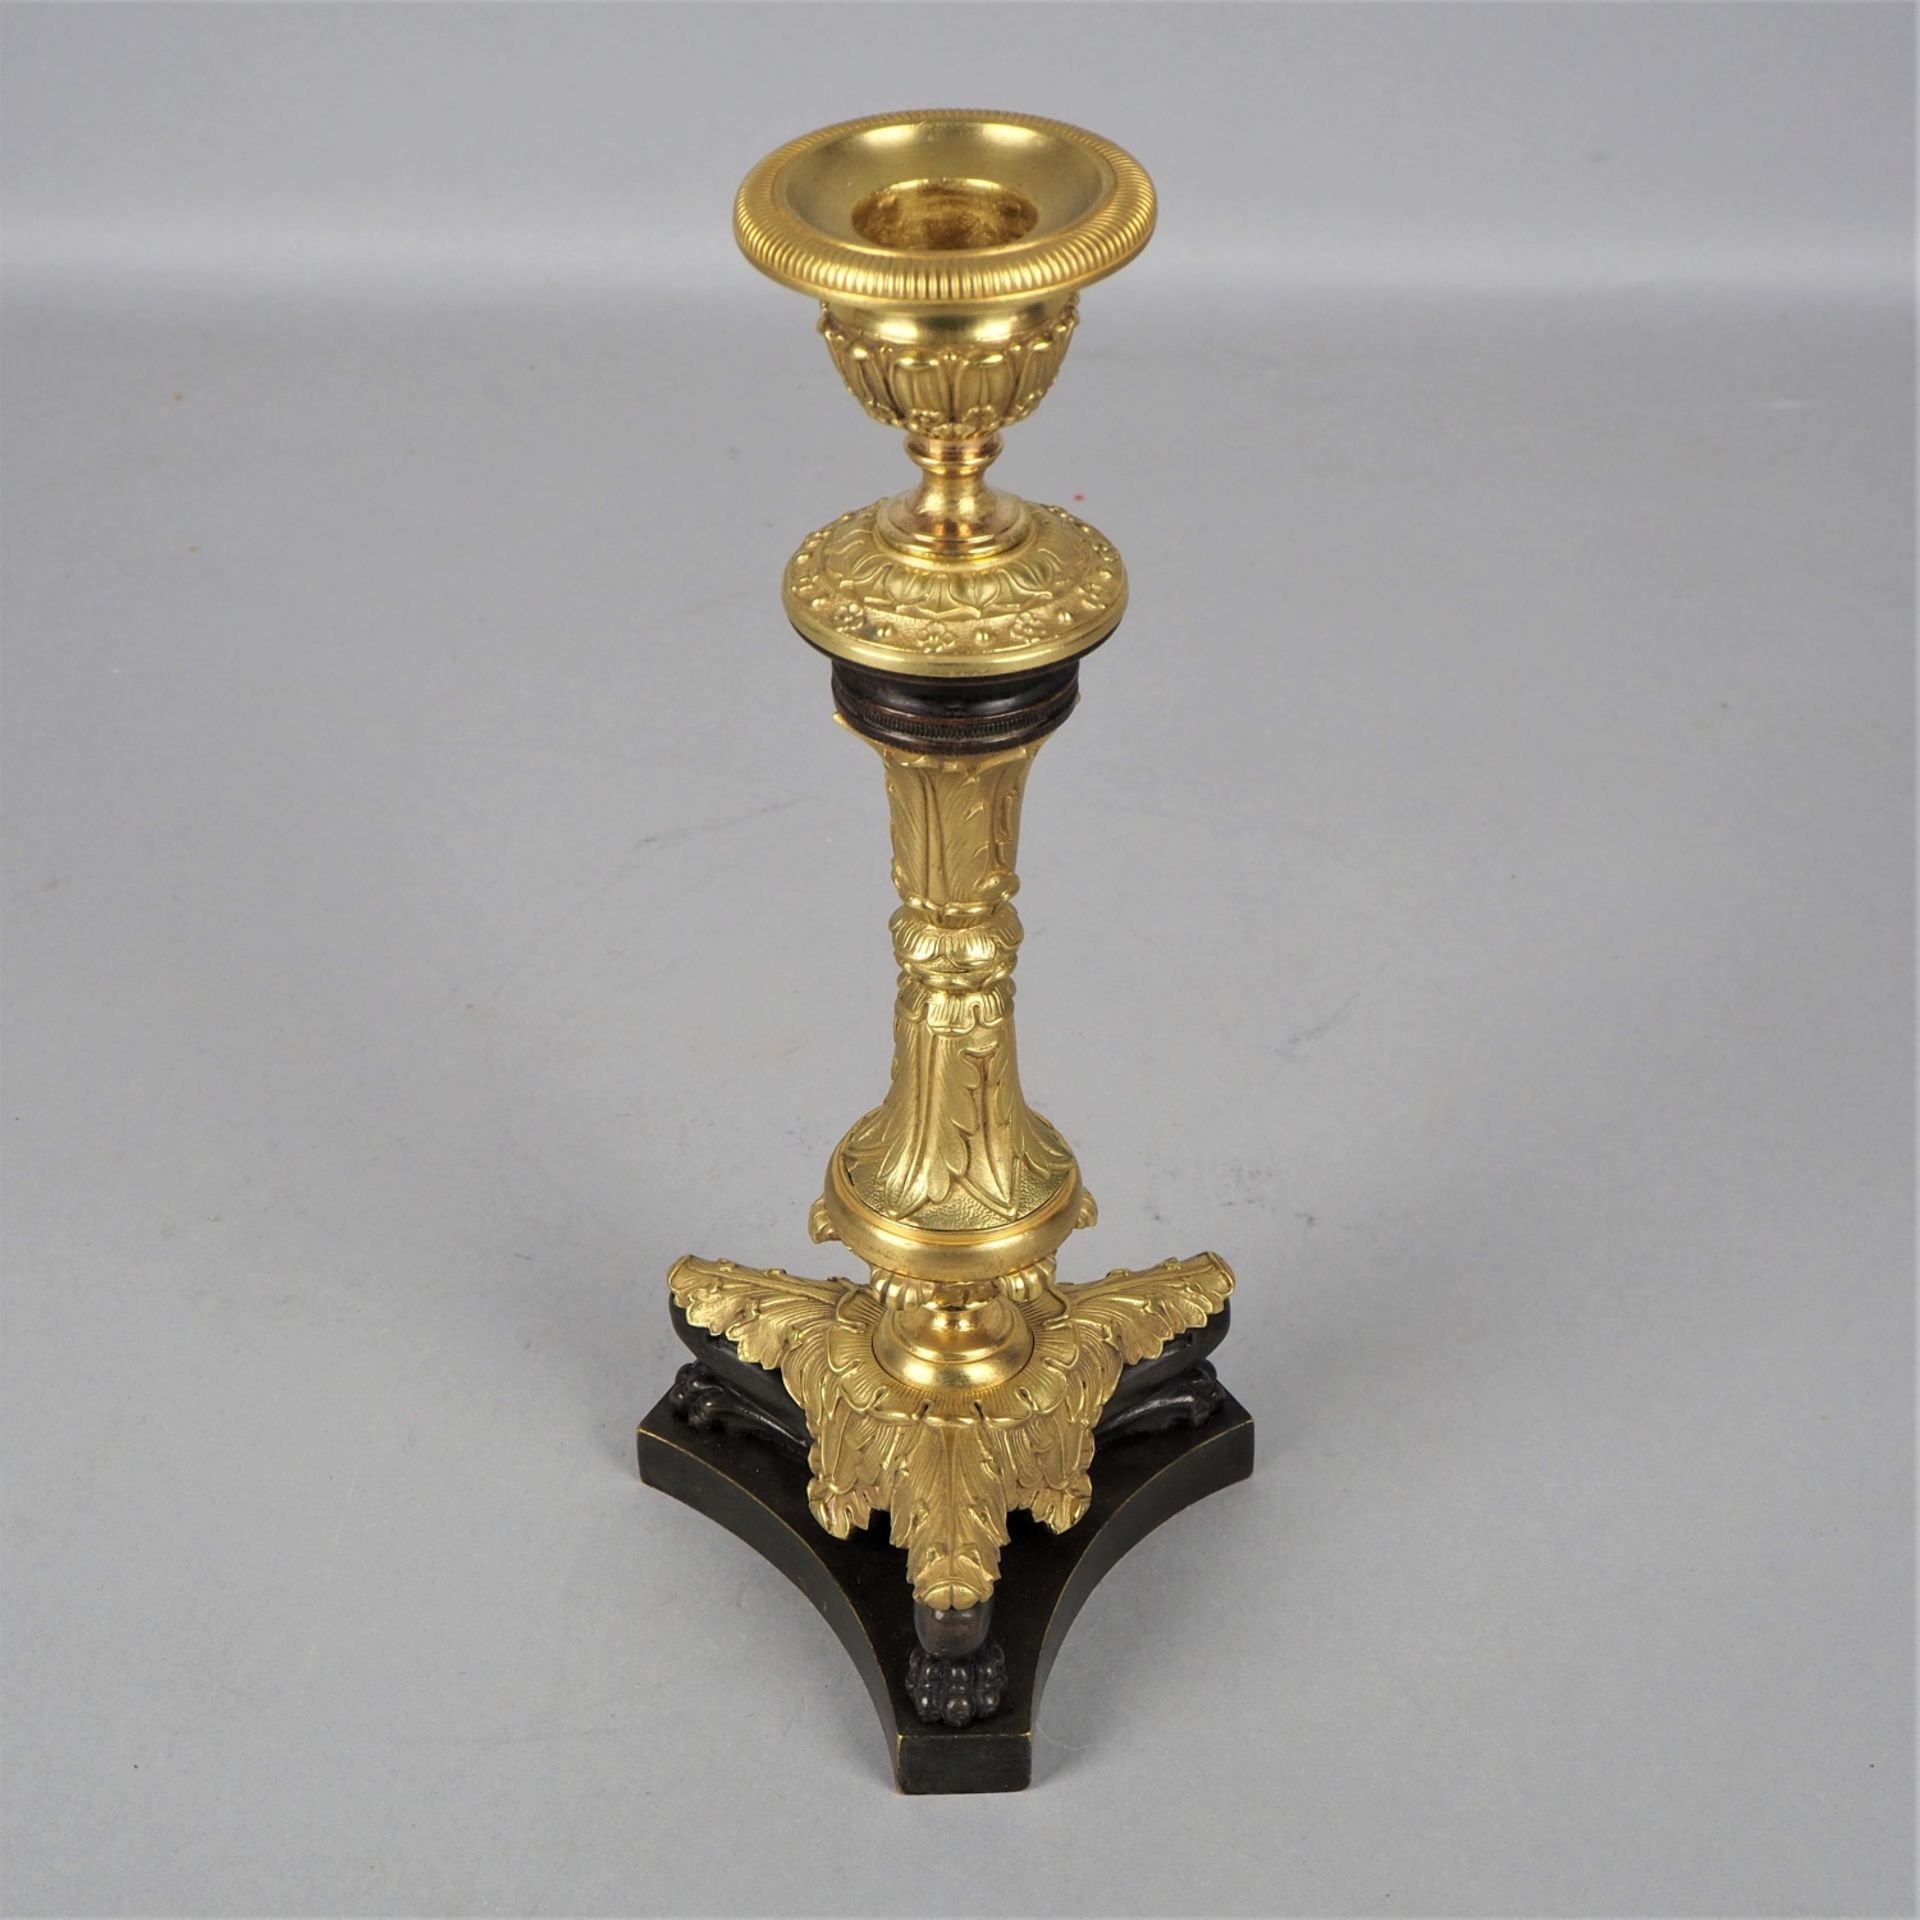 Pair of Empire candlesticks, France circa 1840 - Image 2 of 3